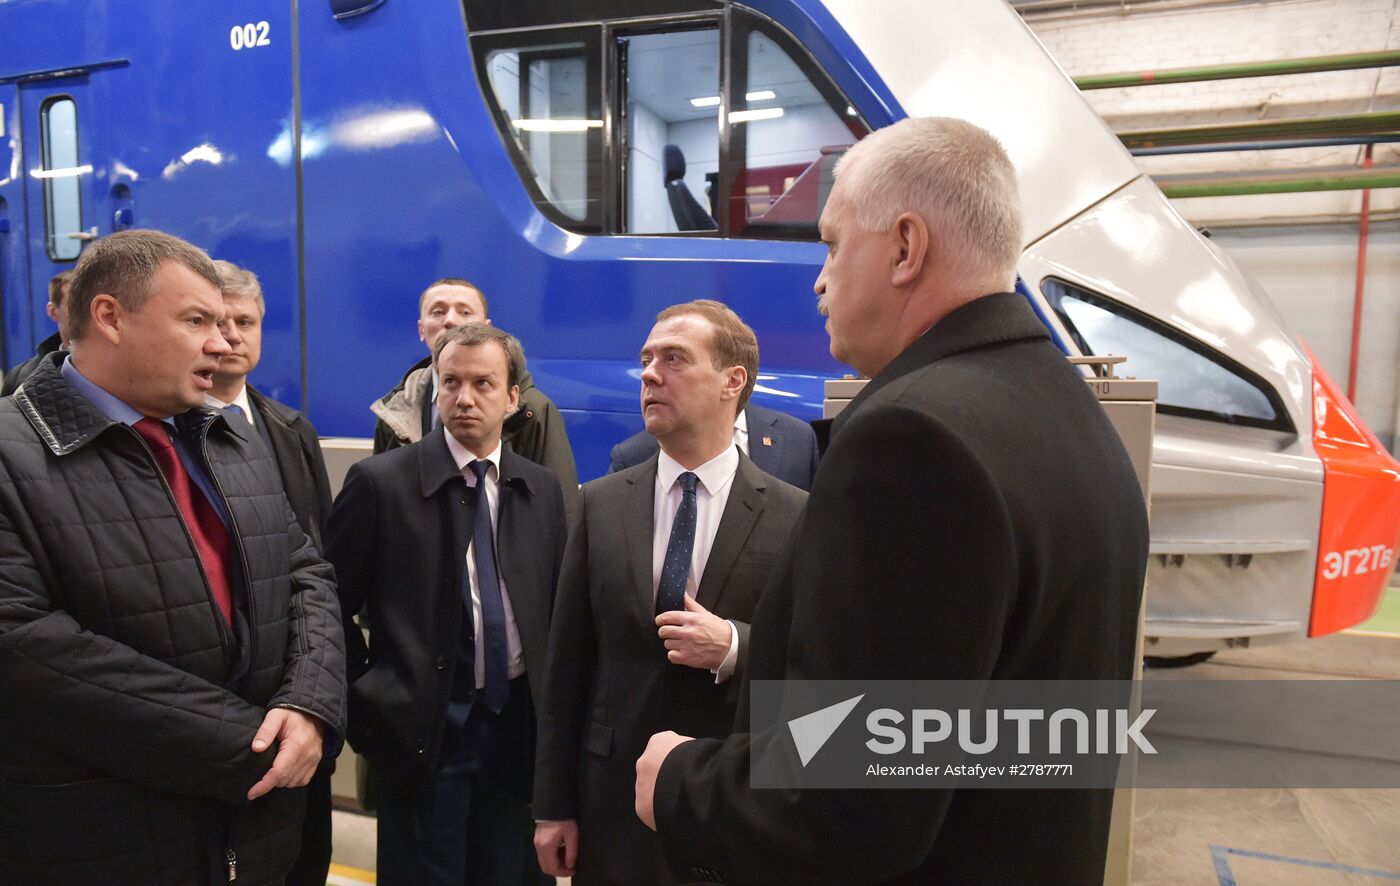 Russian Prime Minister Dmitry Medvedev's working trip to Tver